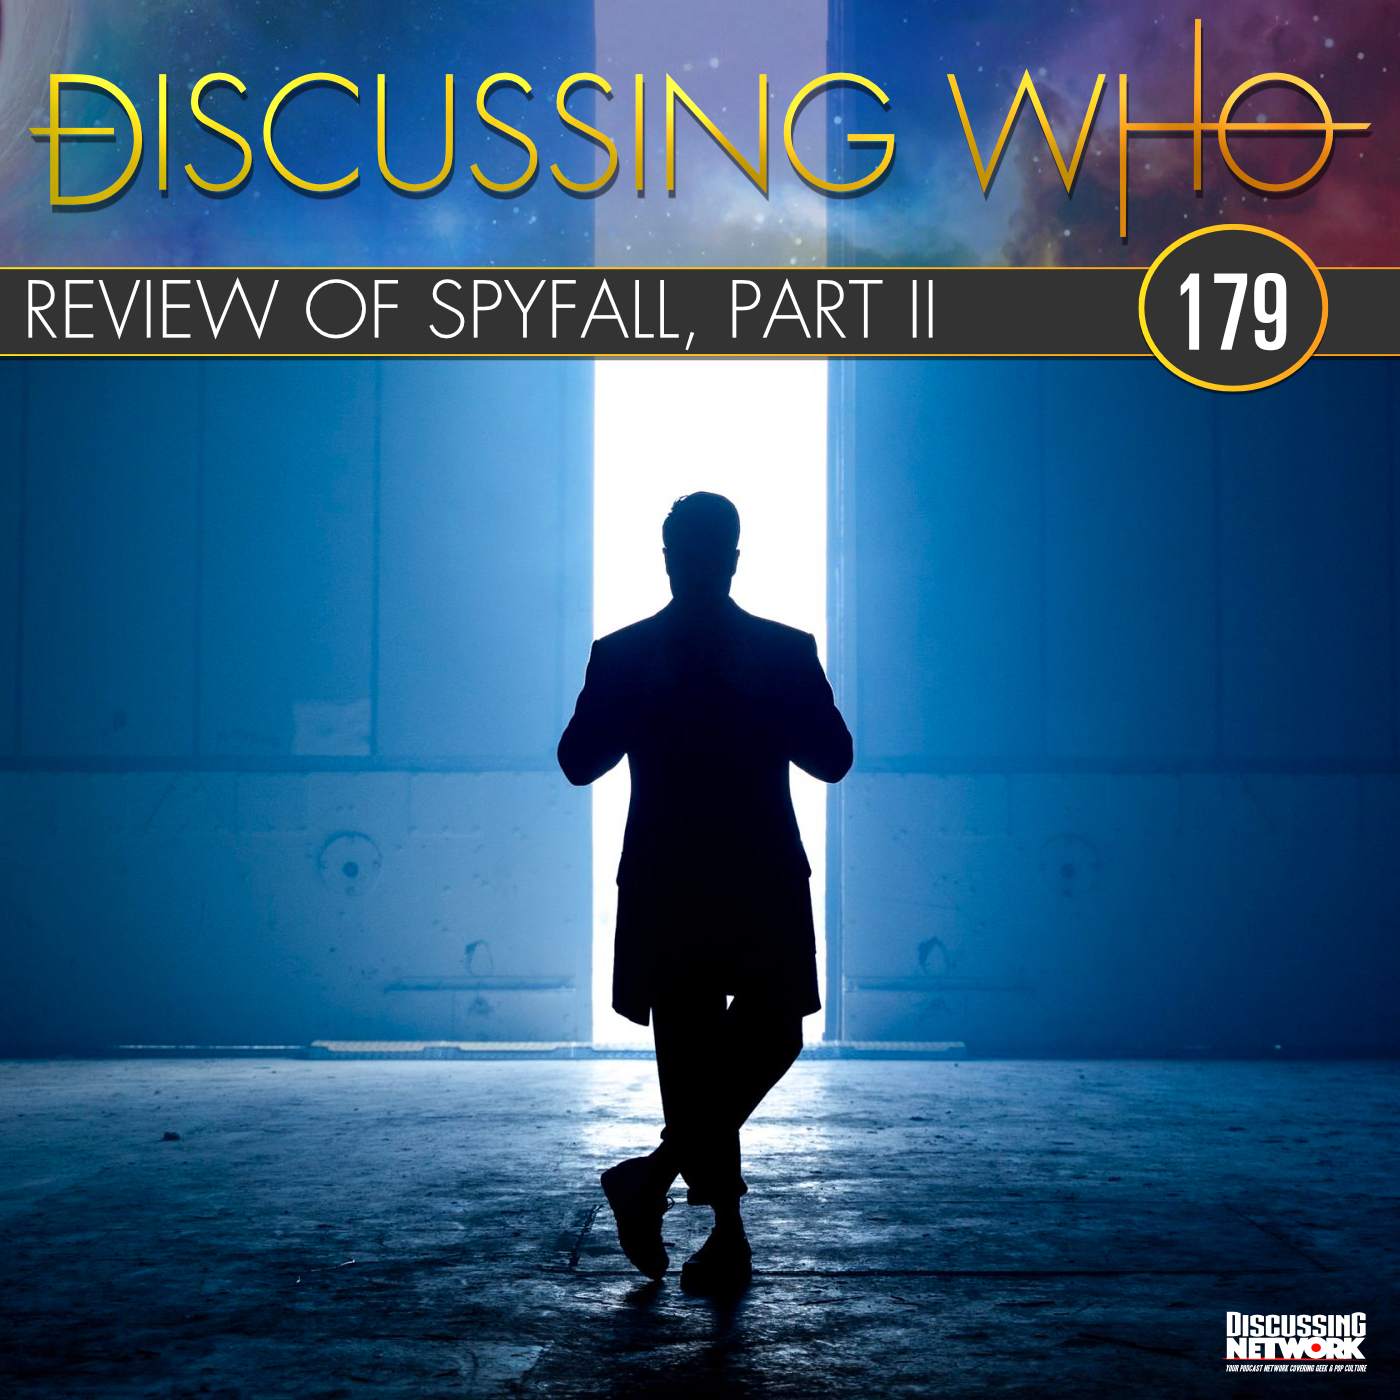 Discussing Who Review of Spyfall, Part II